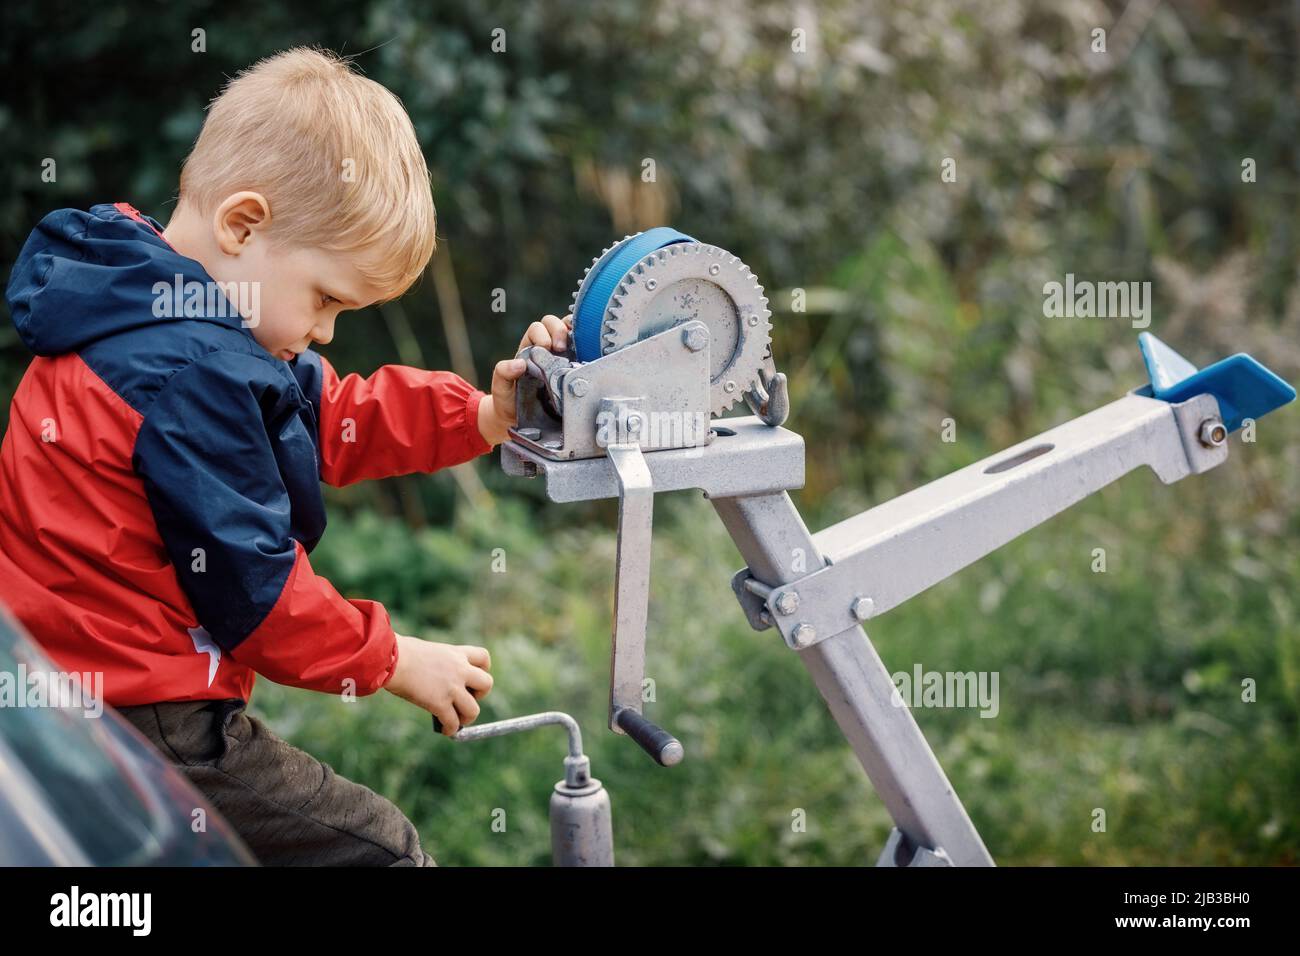 The little boy concentrated and playing with boat trailer winch, boat bow rest, blue cargo strap and its pulley and gears. The child turns the knob. Stock Photo